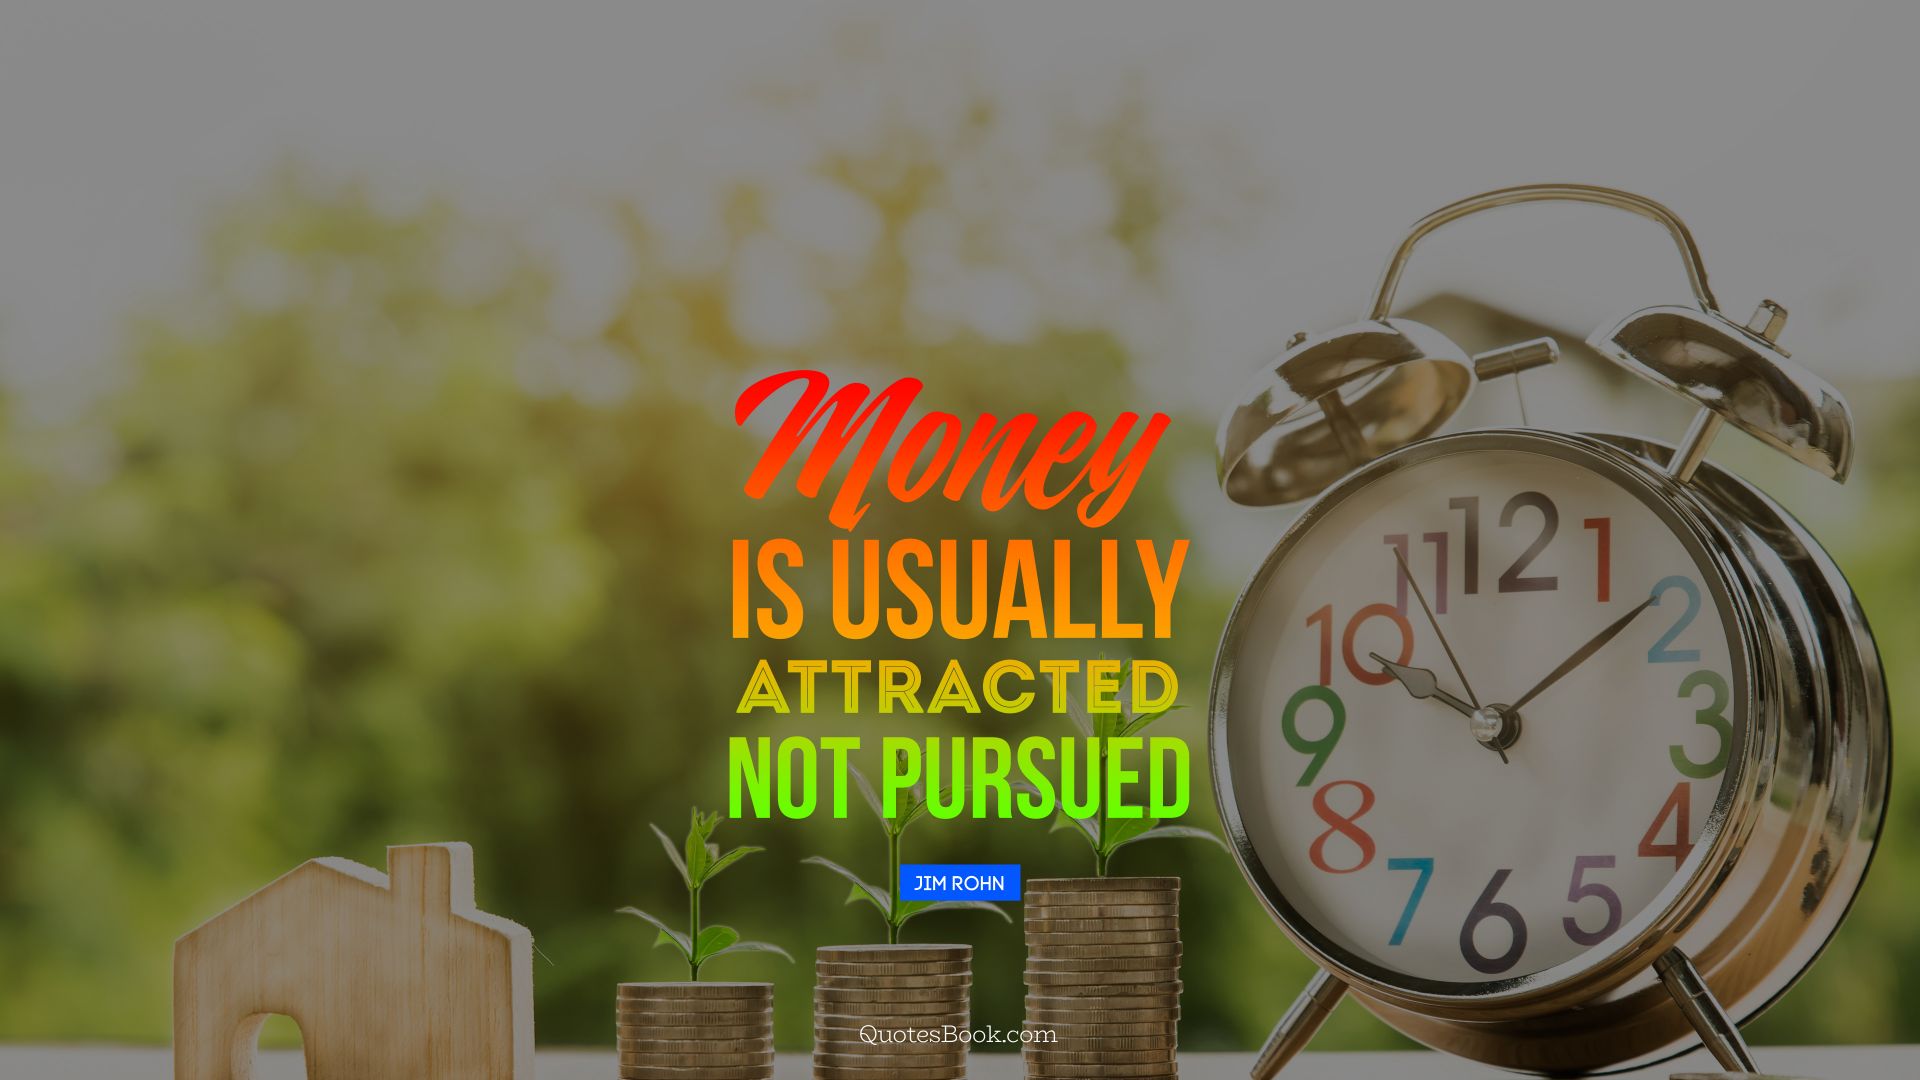 Money is usually attracted not pursued. - Quote by Jim Rohn